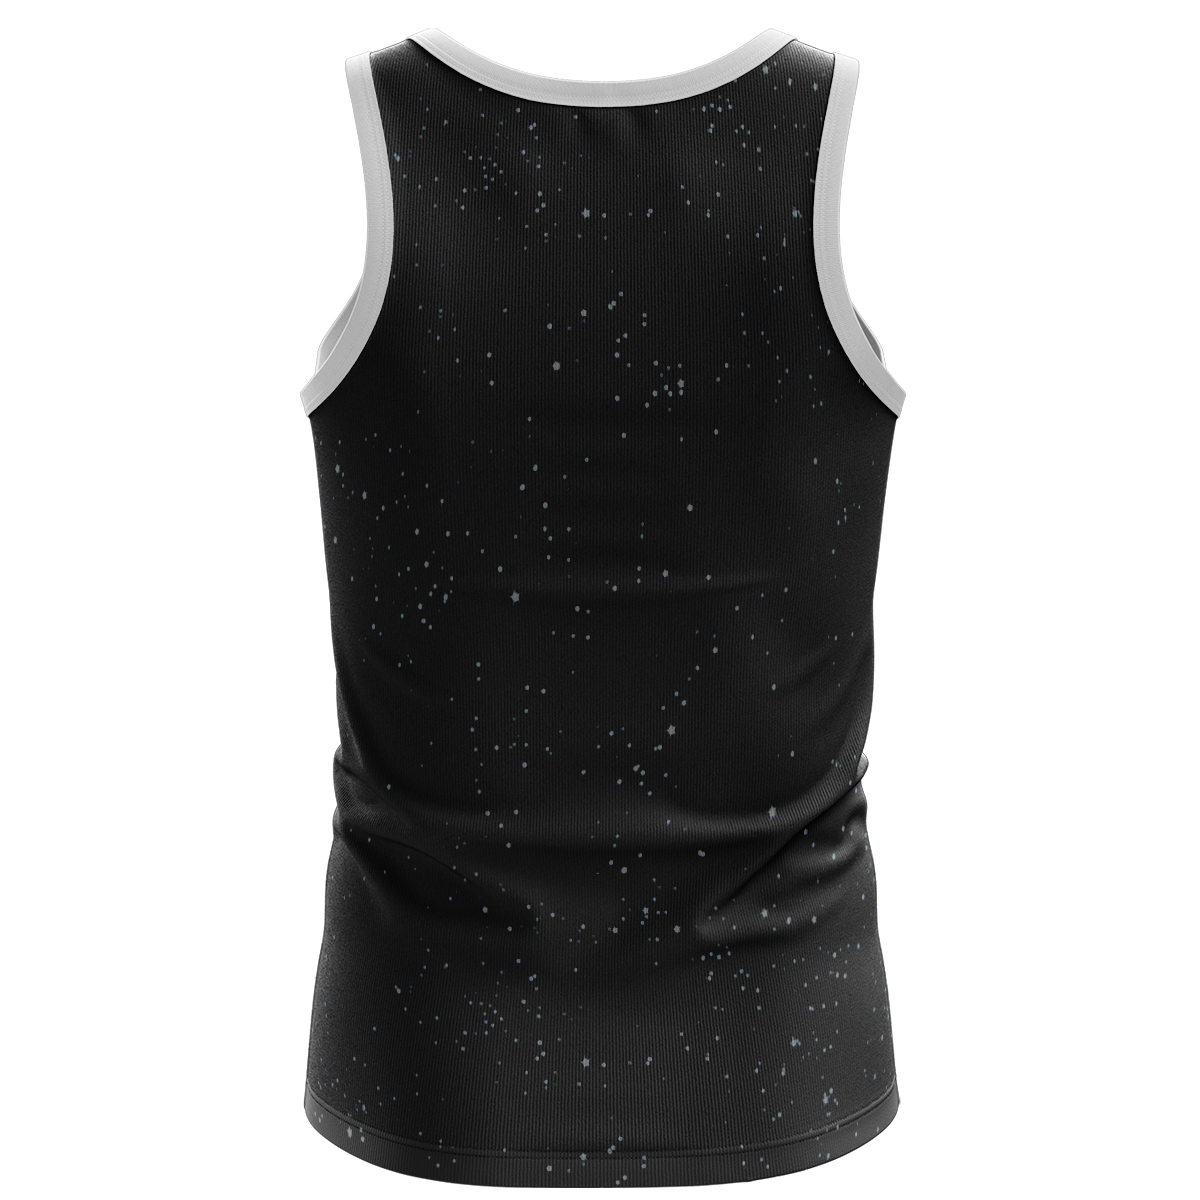 Observe And Reflect Unisex Tank Tops Tanktop